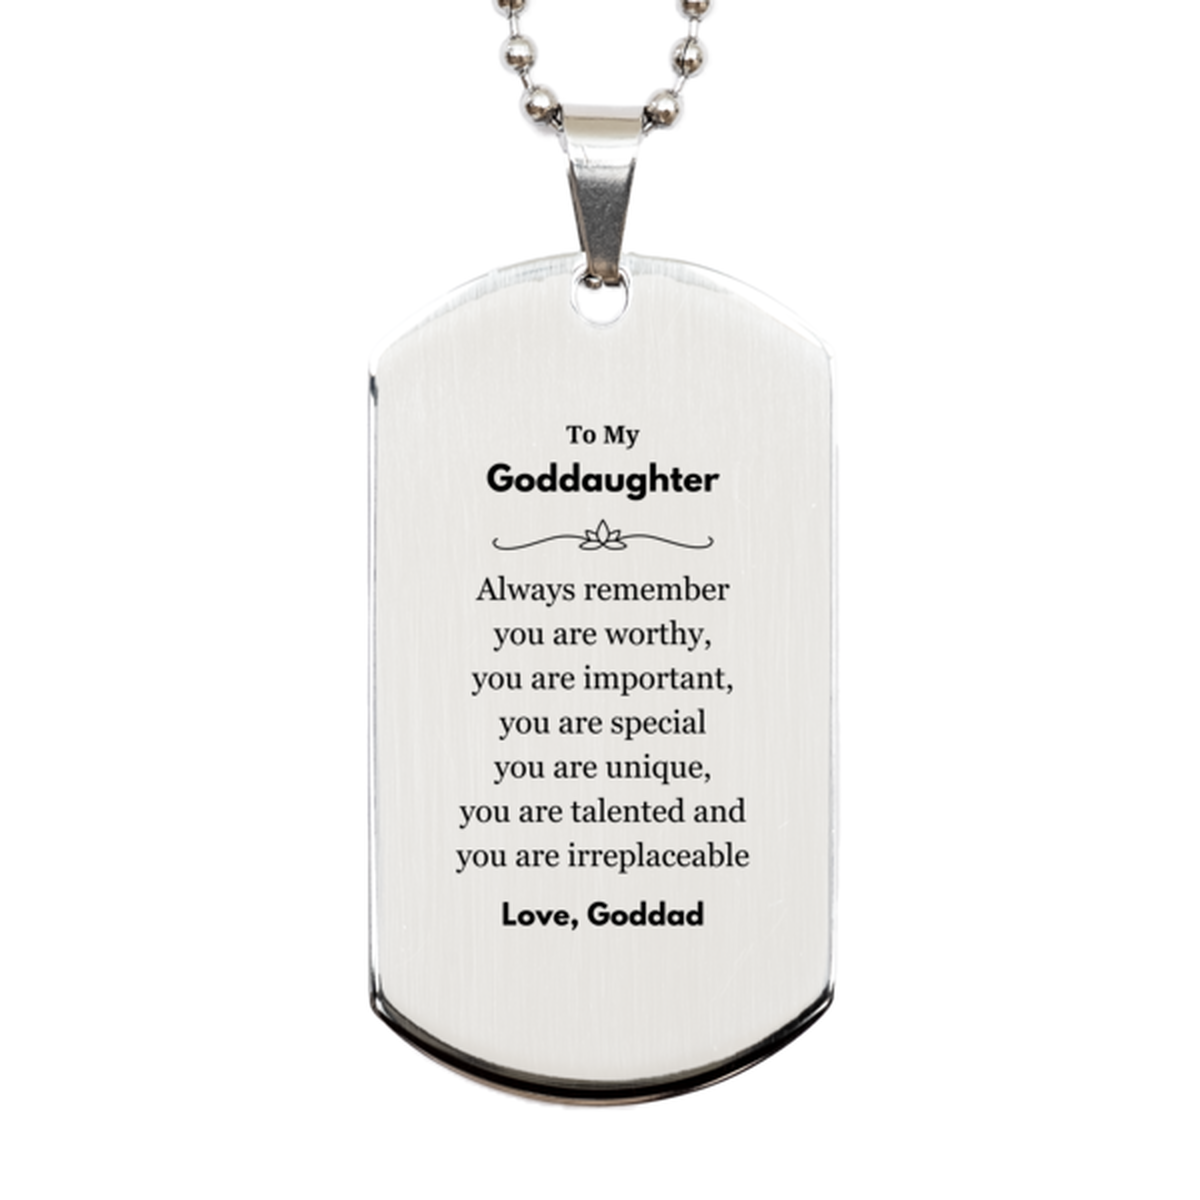 Goddaughter Birthday Gifts from Goddad, Inspirational Silver Dog Tag for Goddaughter Christmas Graduation Gifts for Goddaughter Always remember you are worthy, you are important. Love, Goddad